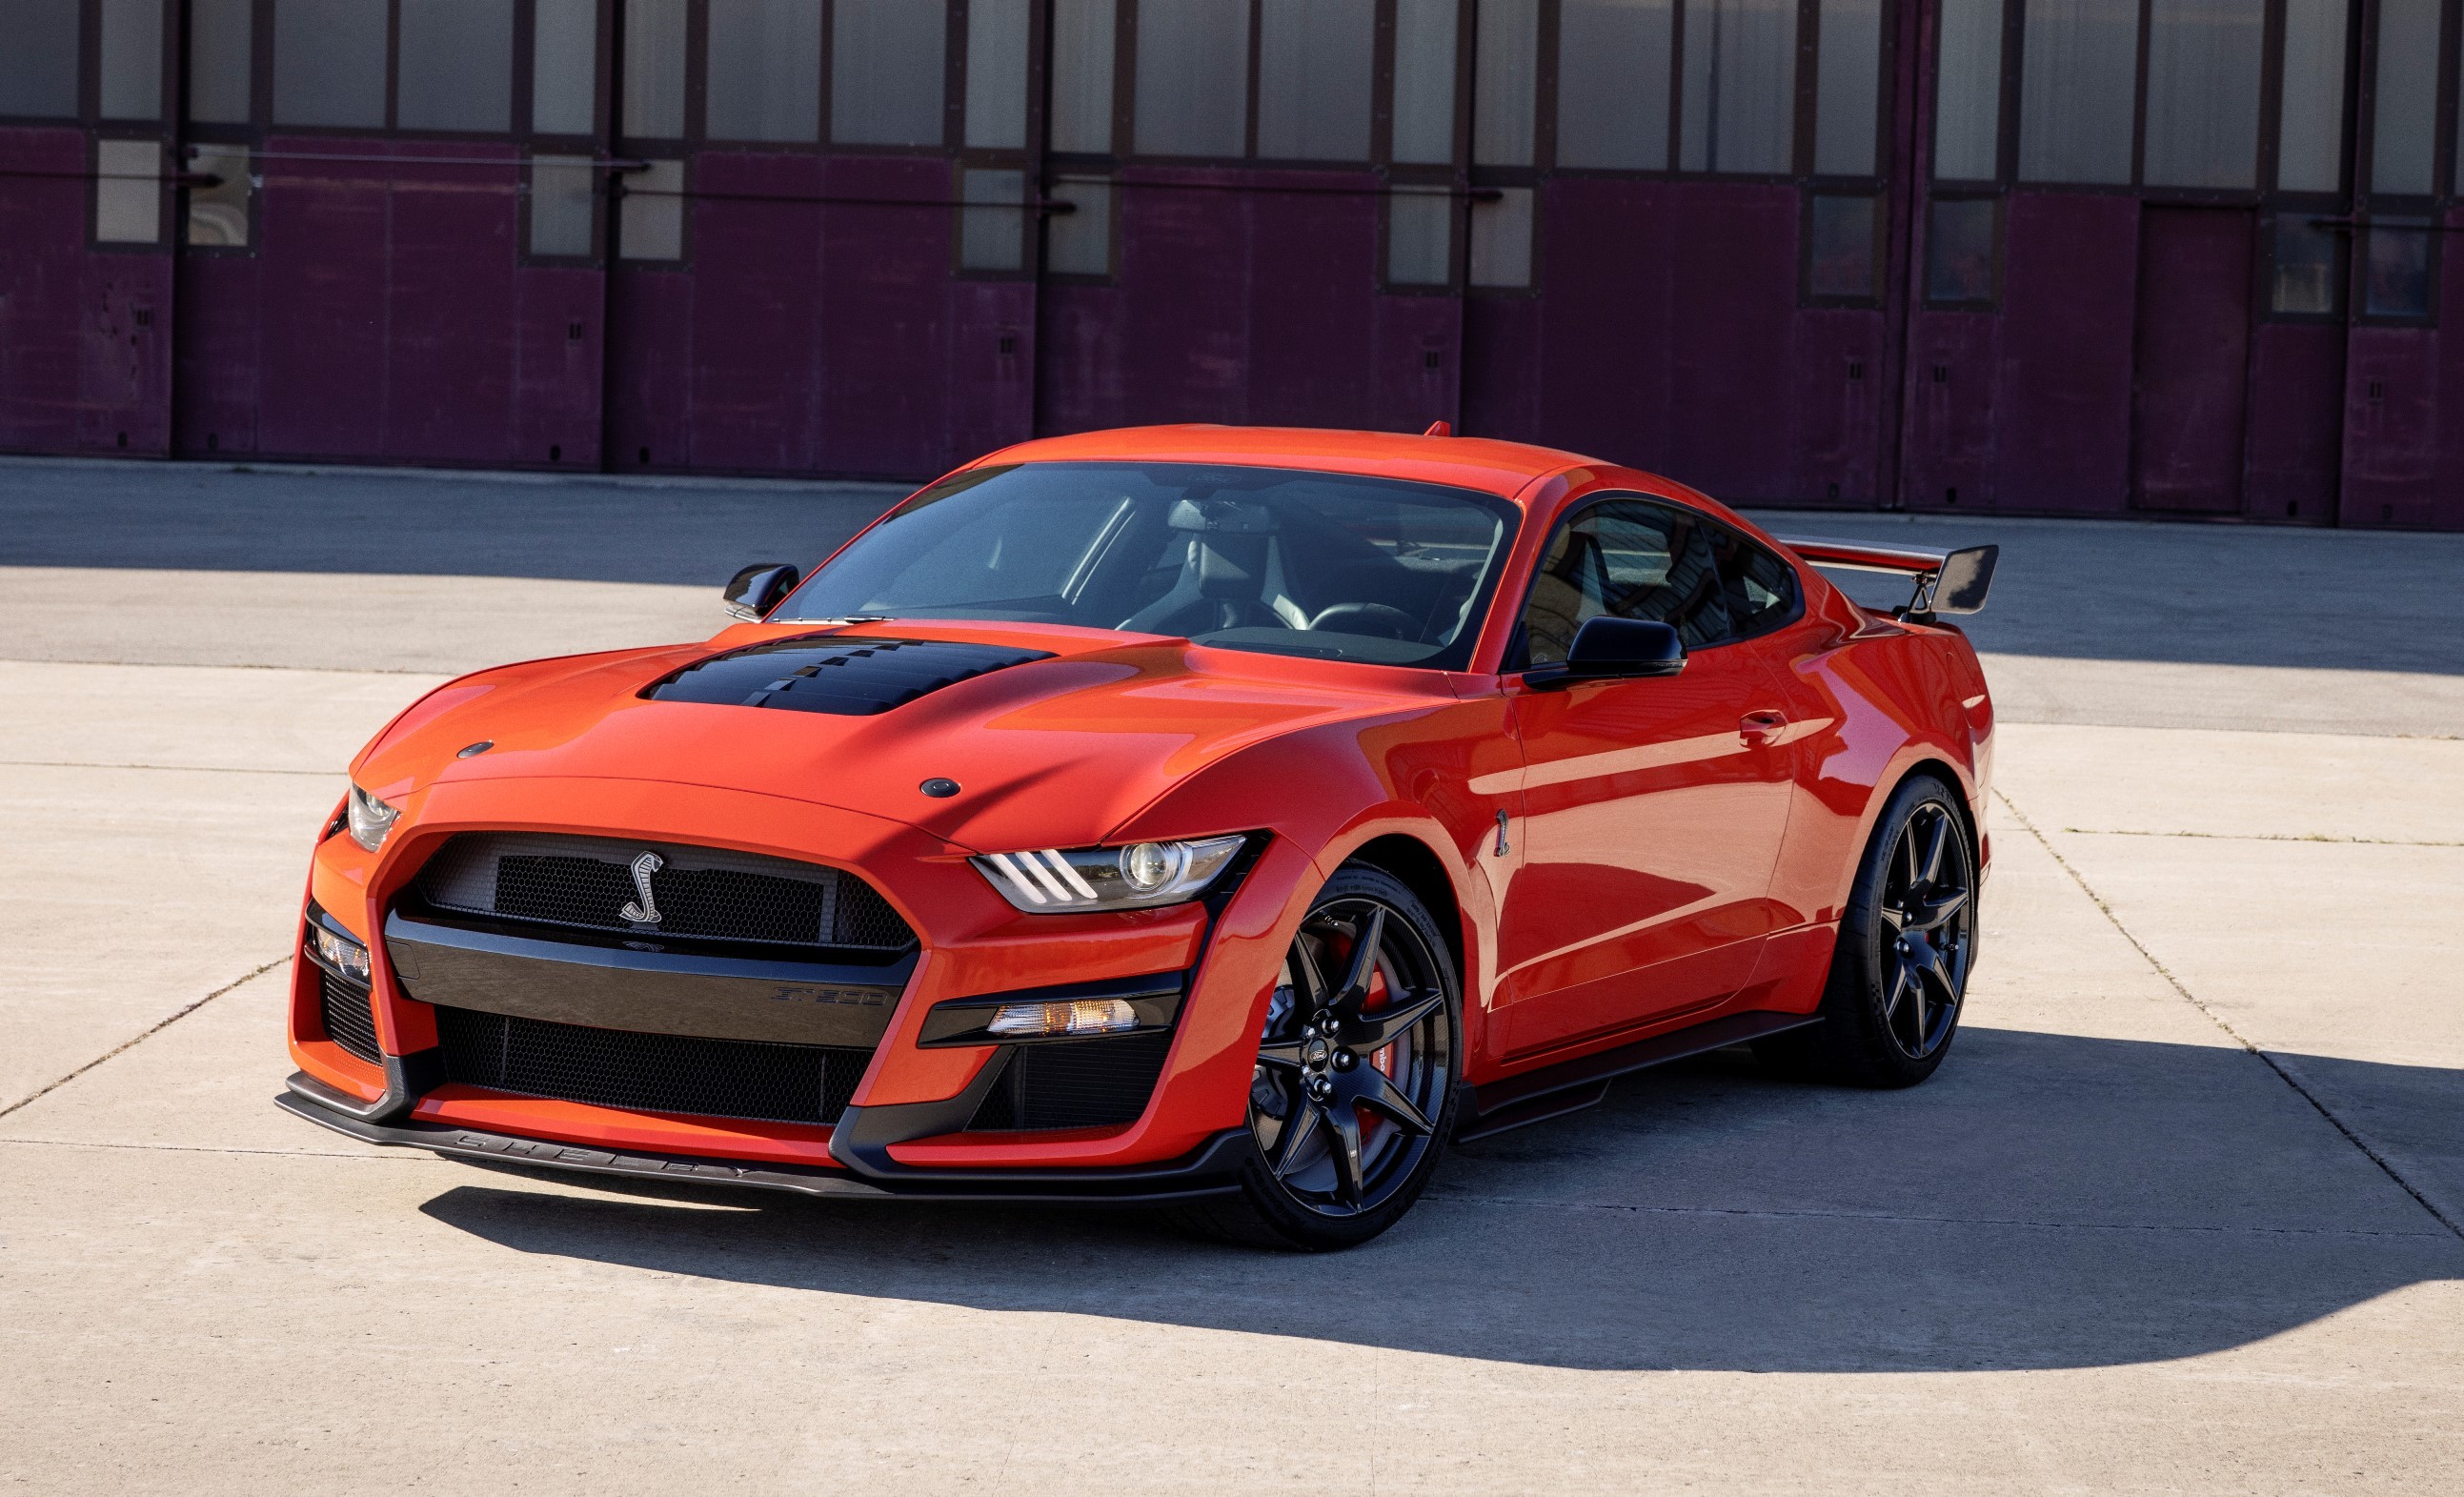 Ford Mustang Shelby GT500 Dead After MY22, Redesign Expected in 2025